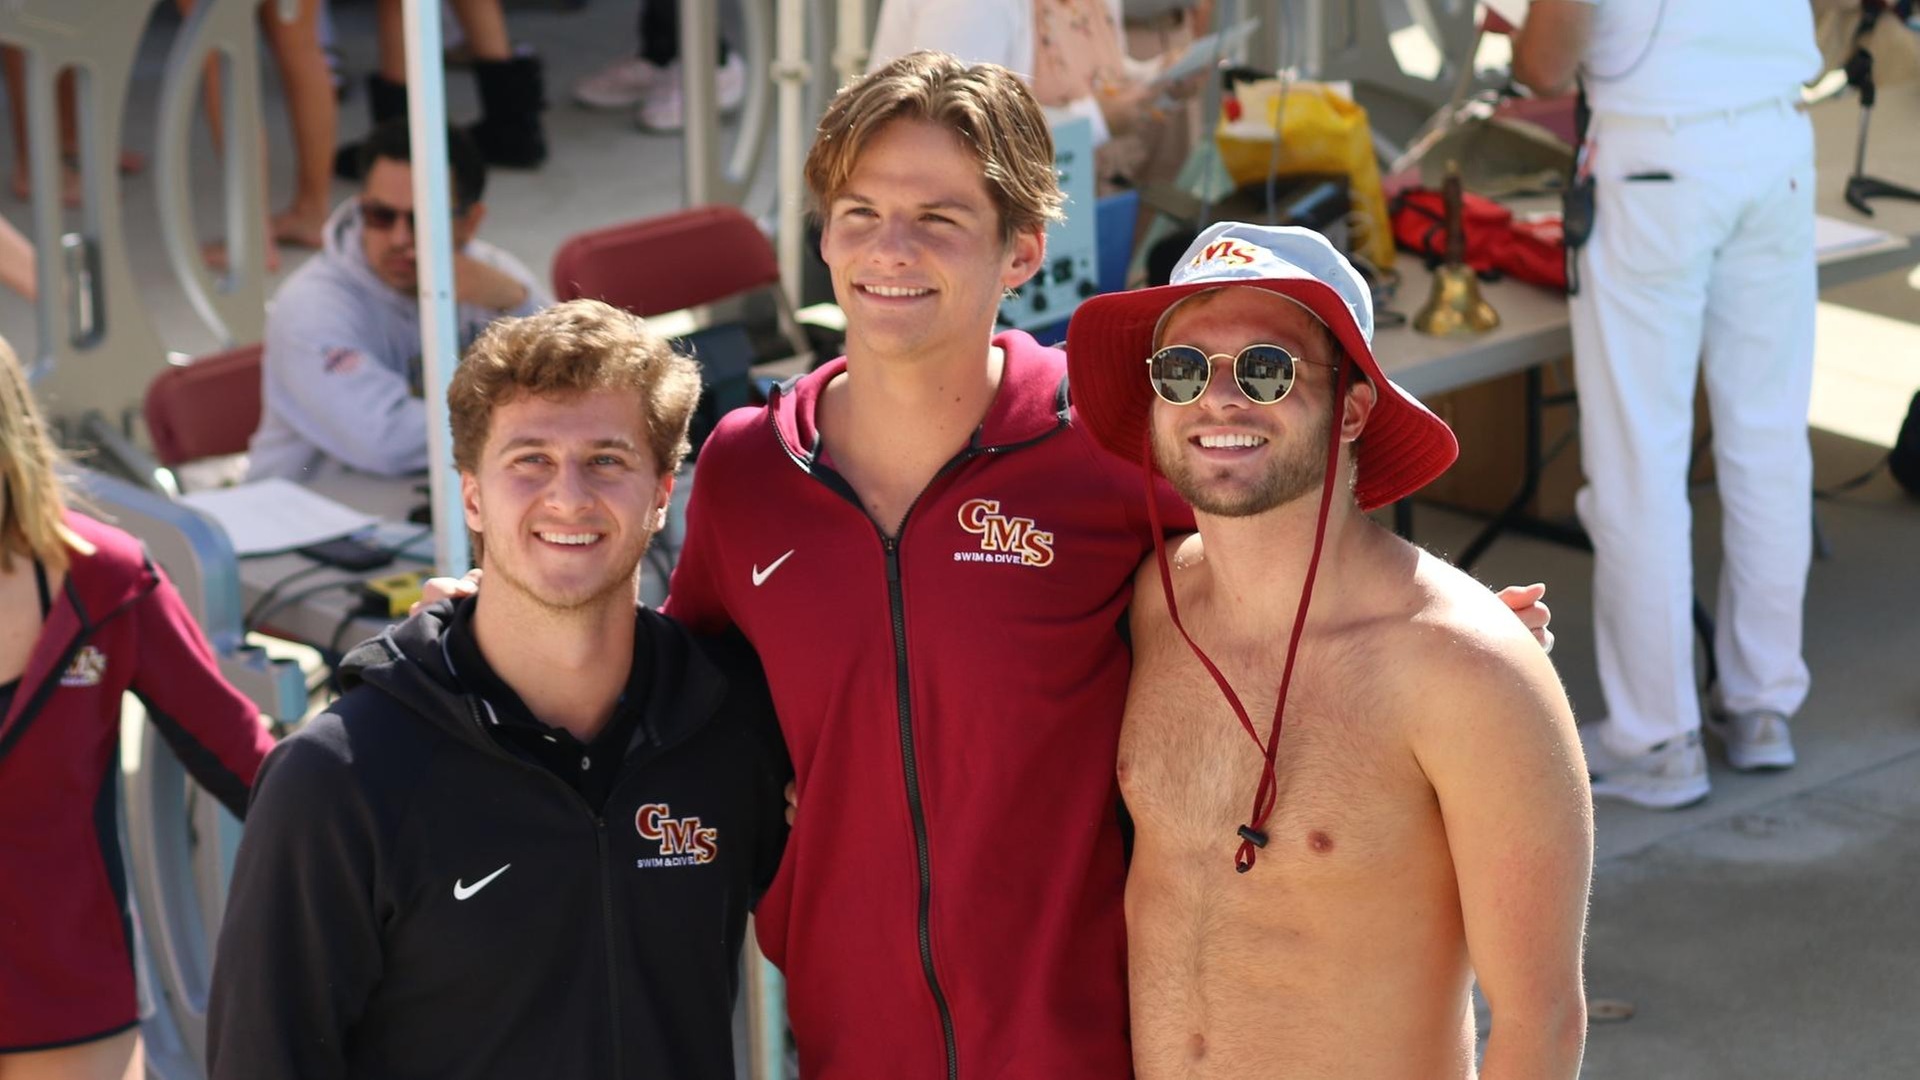 Nathan Luis, Alec Vercruysse and Thayer Breazeale were honored before the meet